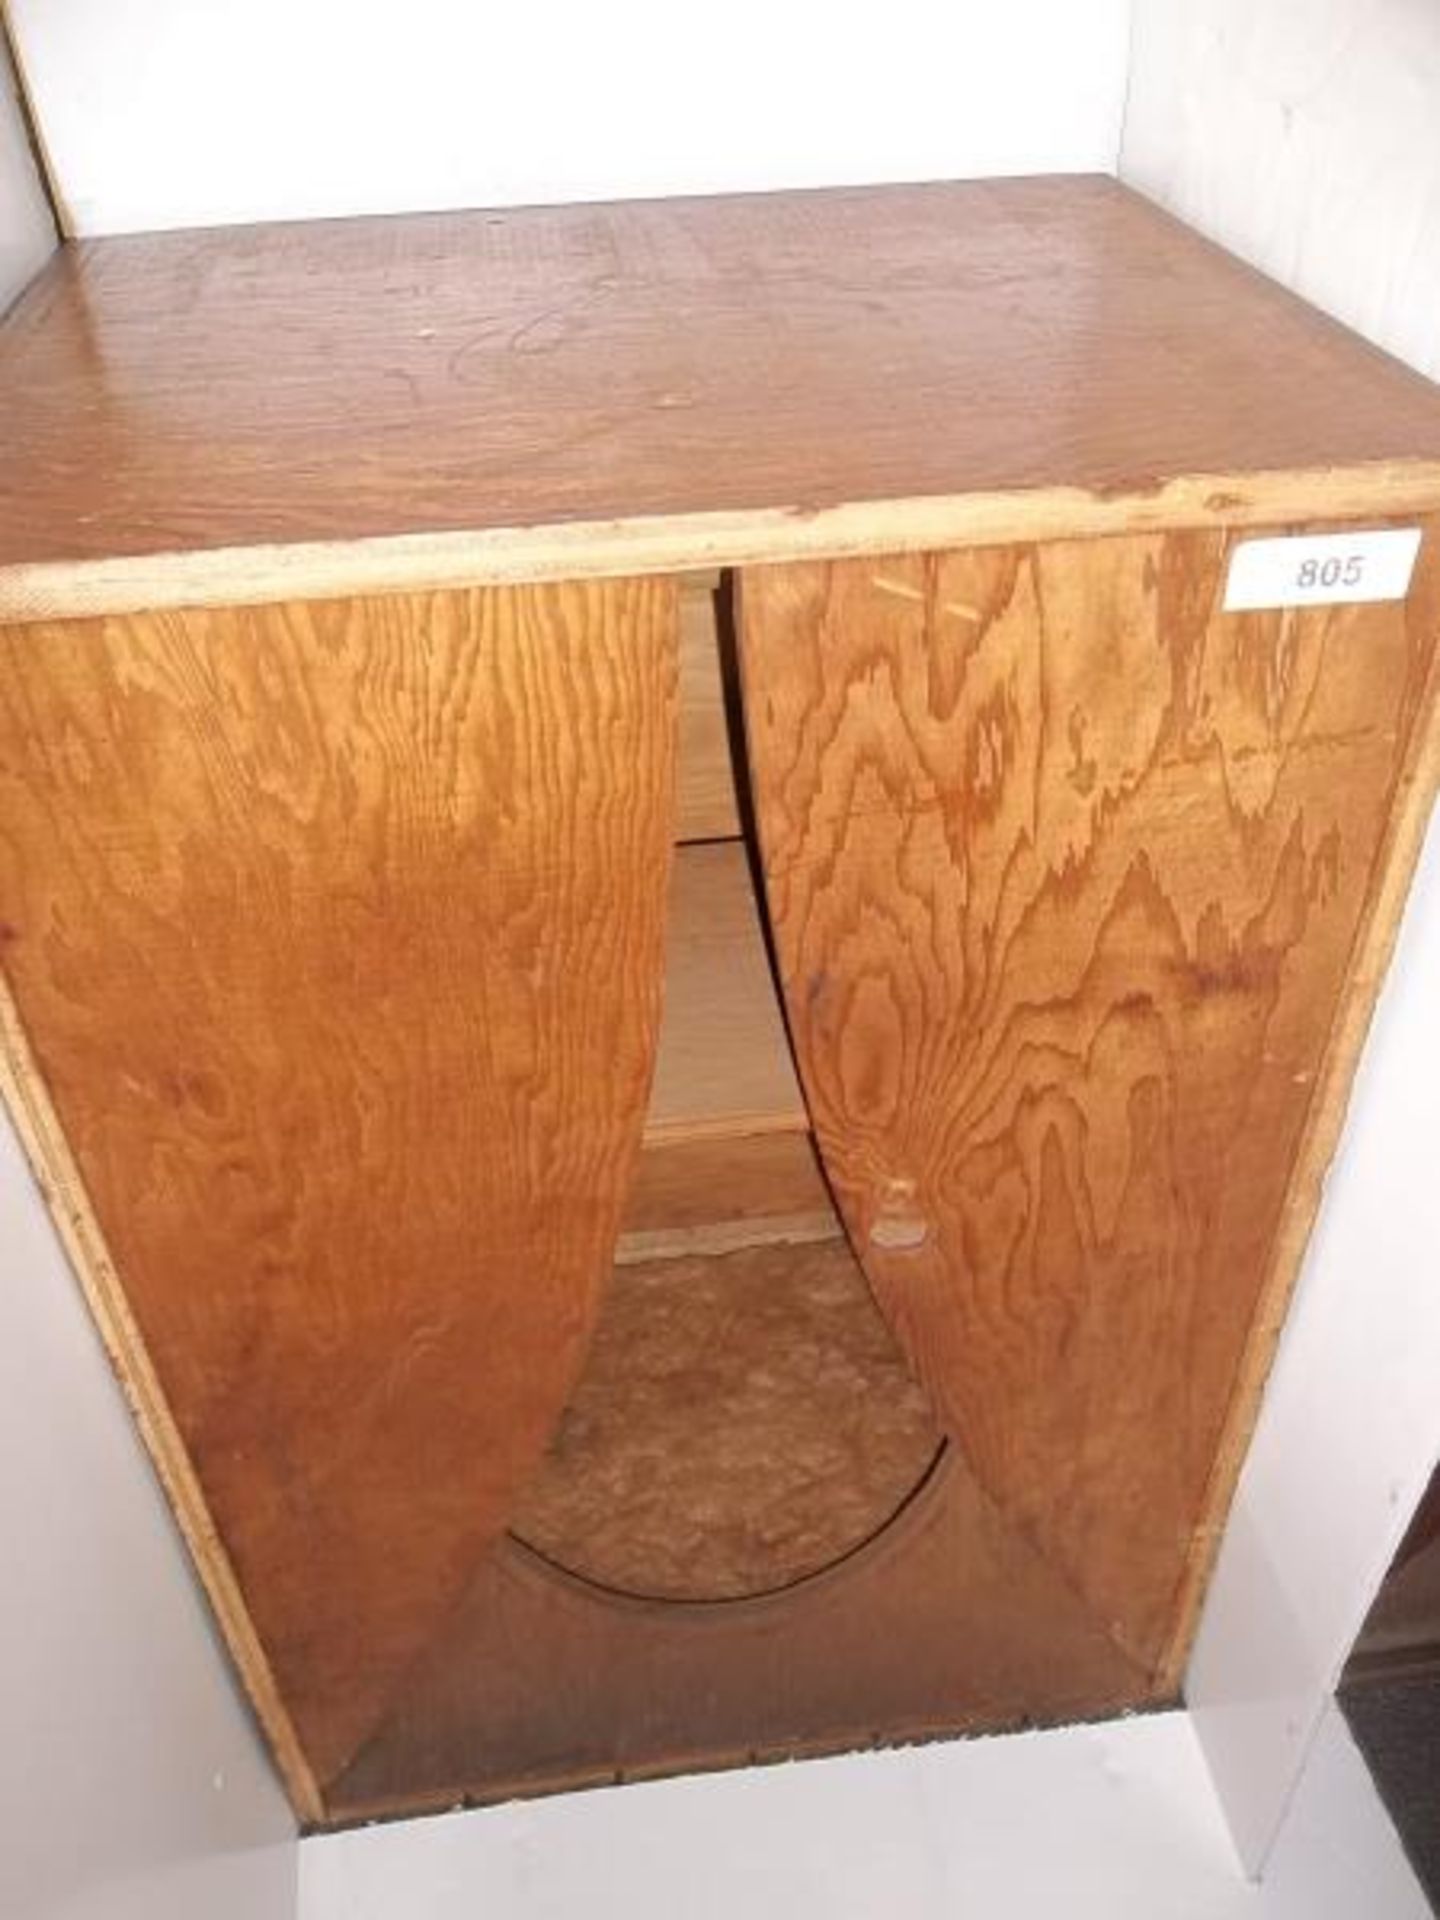 Plywood Speaker Cabinet, no screen, 18" x 22" x 33"h